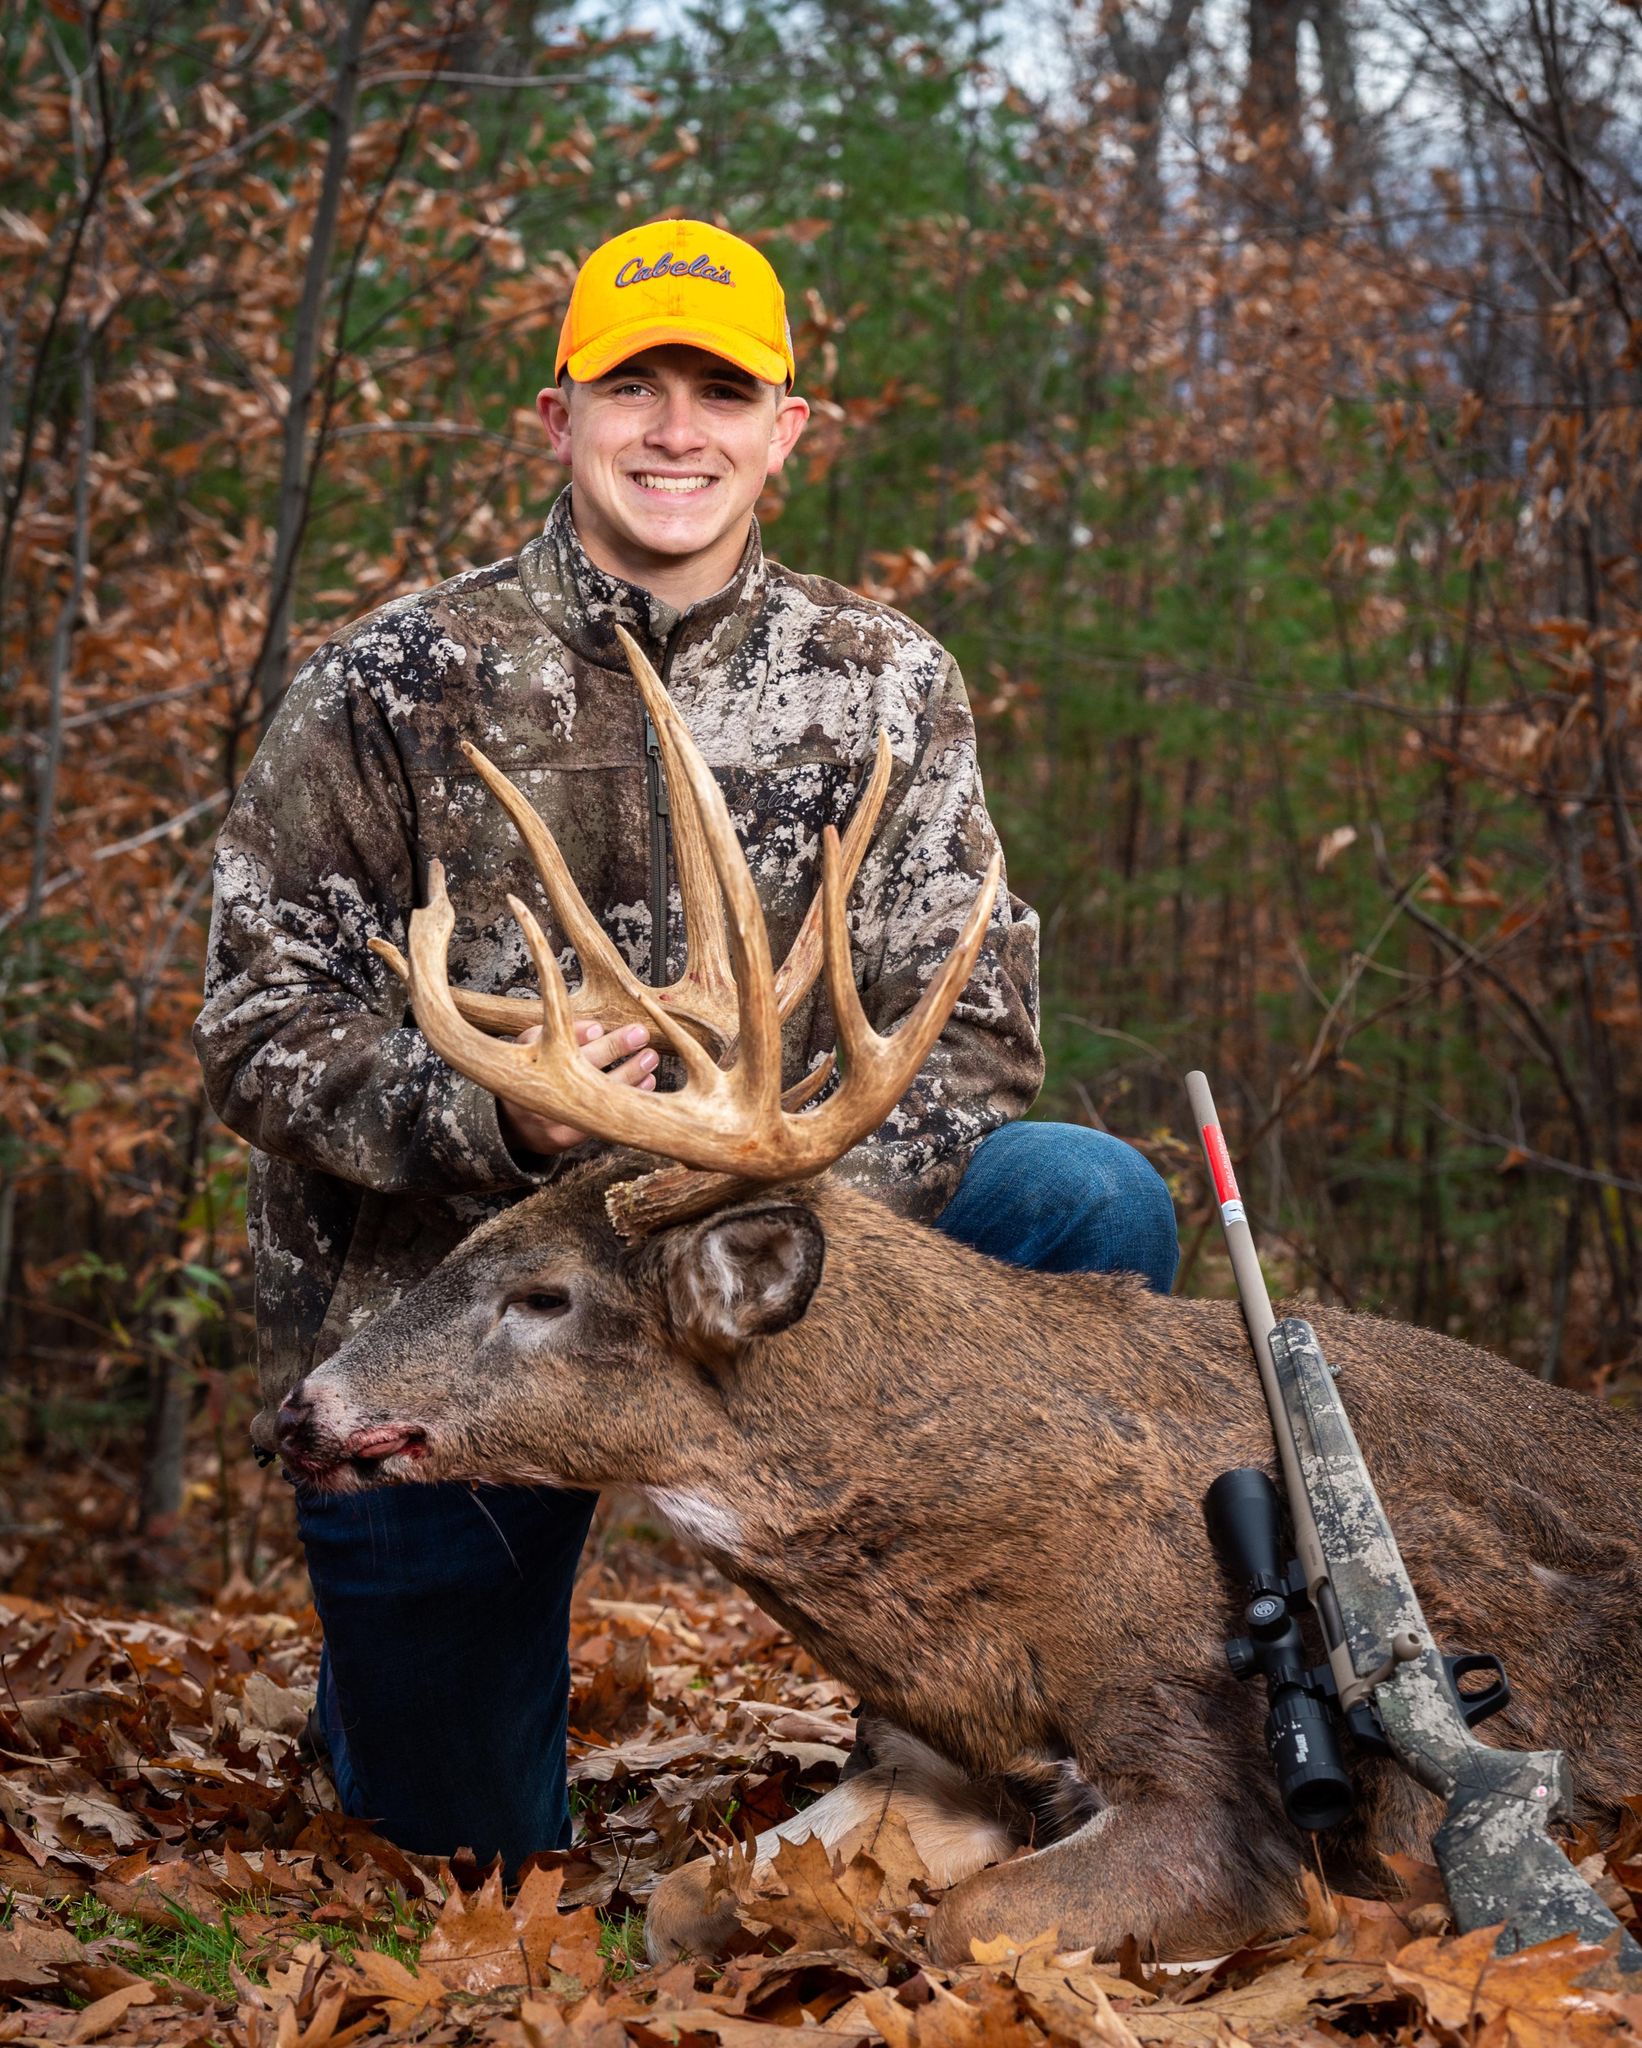 Capano's buck weighed 206 pounds.